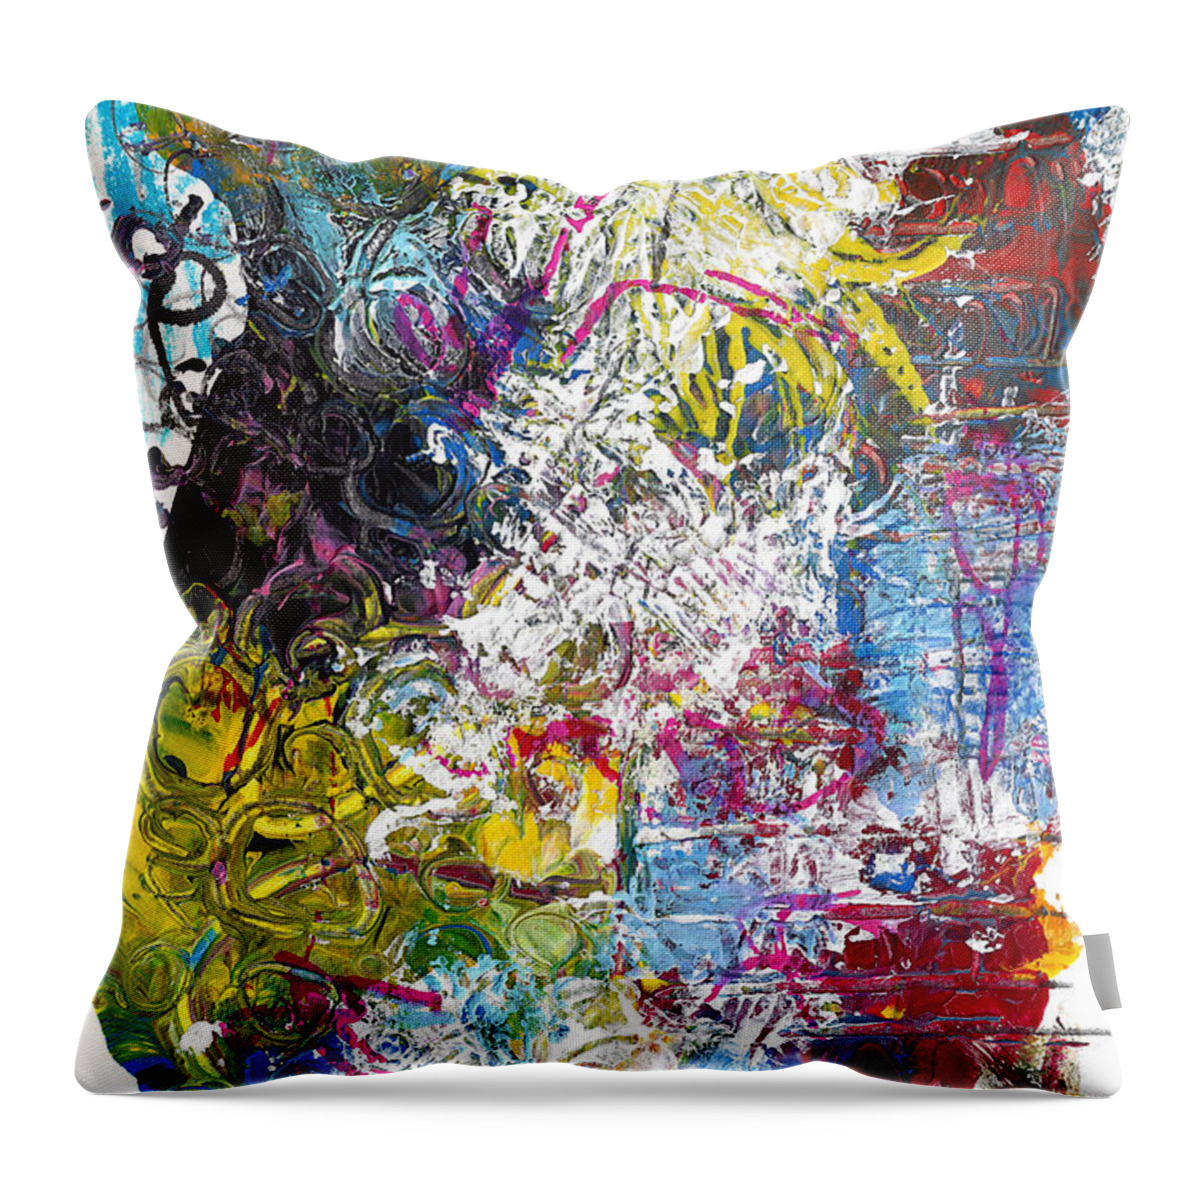 Abstract Throw Pillow featuring the mixed media A Monster In The Candy by Jade Knights